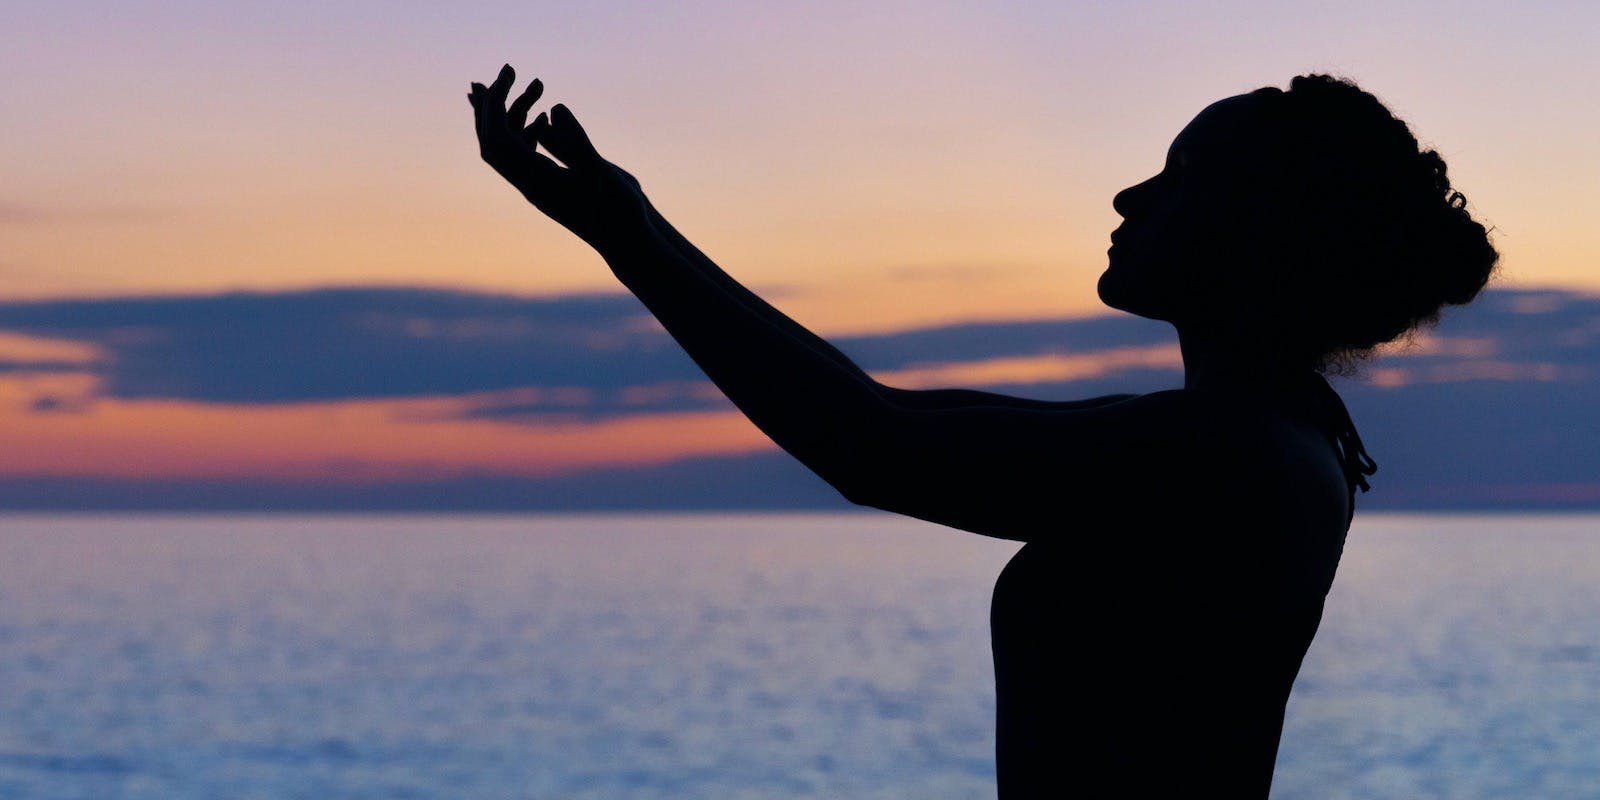 The profiled silhouette of a woman with a sunset behind her. Her arms are stretched and raised in front of her.